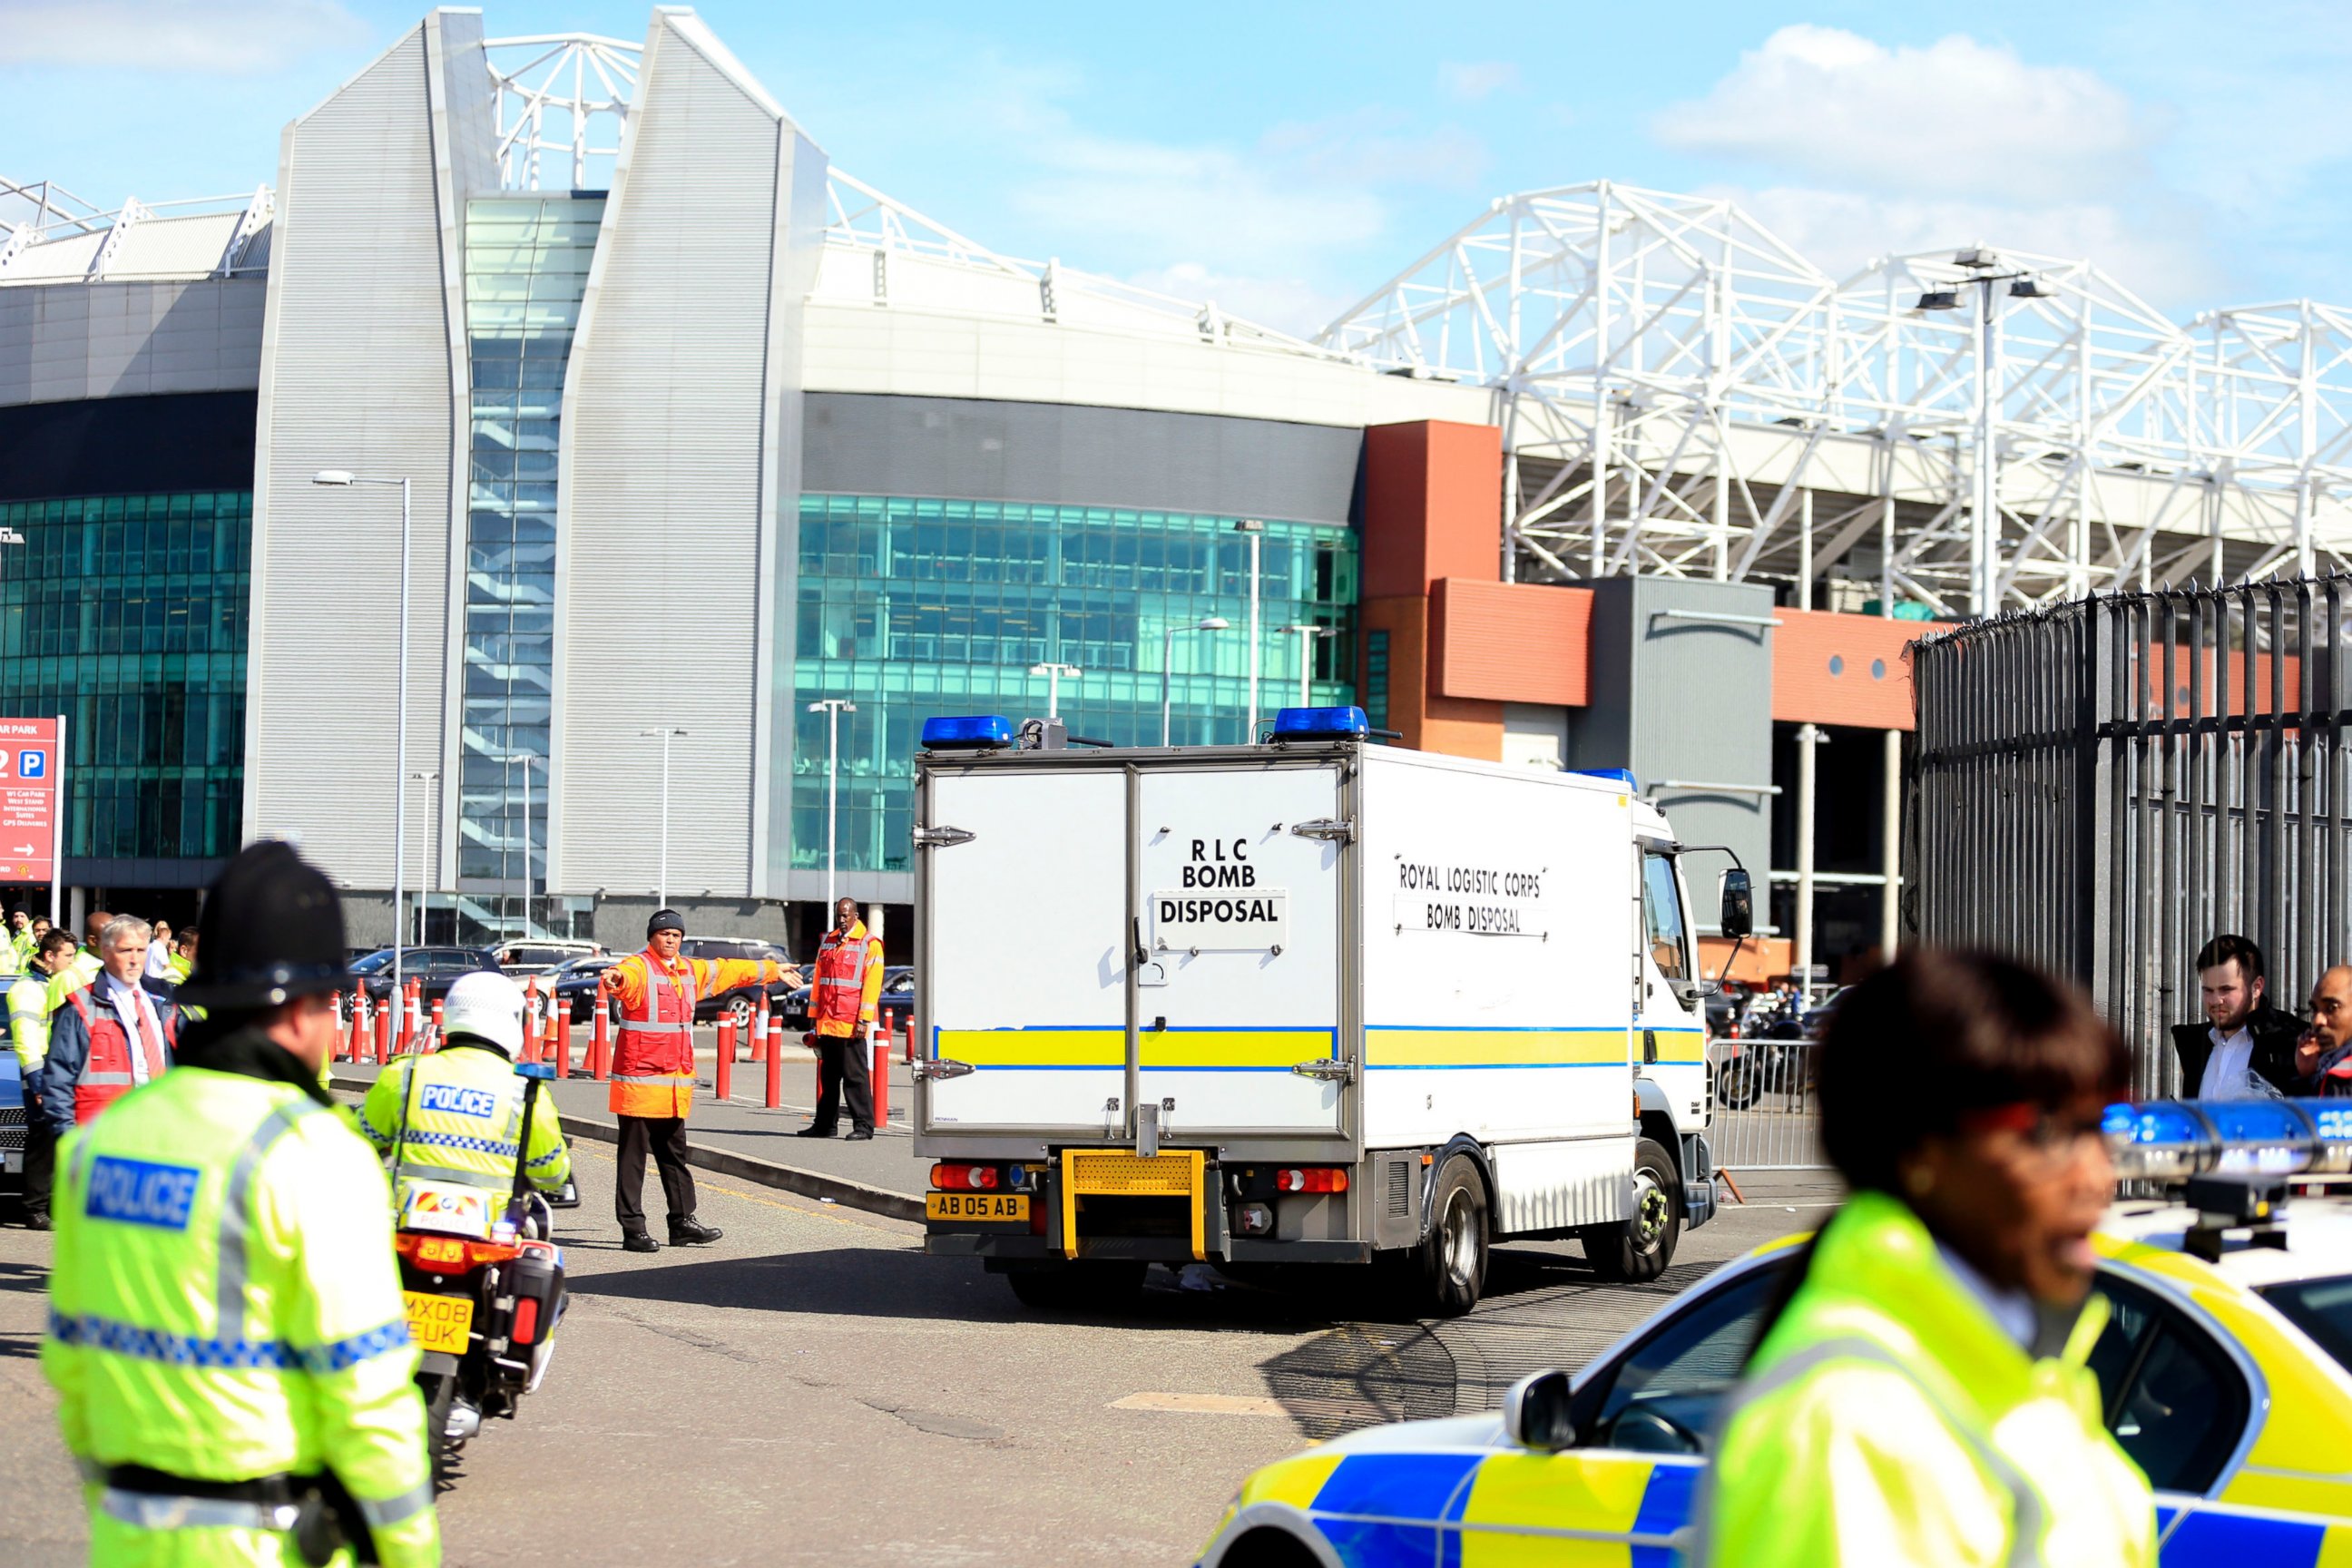 PHOTO: A police bomb disposal unit is seen outside Old Trafford stadium after today's final match of the season between Manchester United and AFC Bournemouth, May 15, 2016 in Manchester, England.